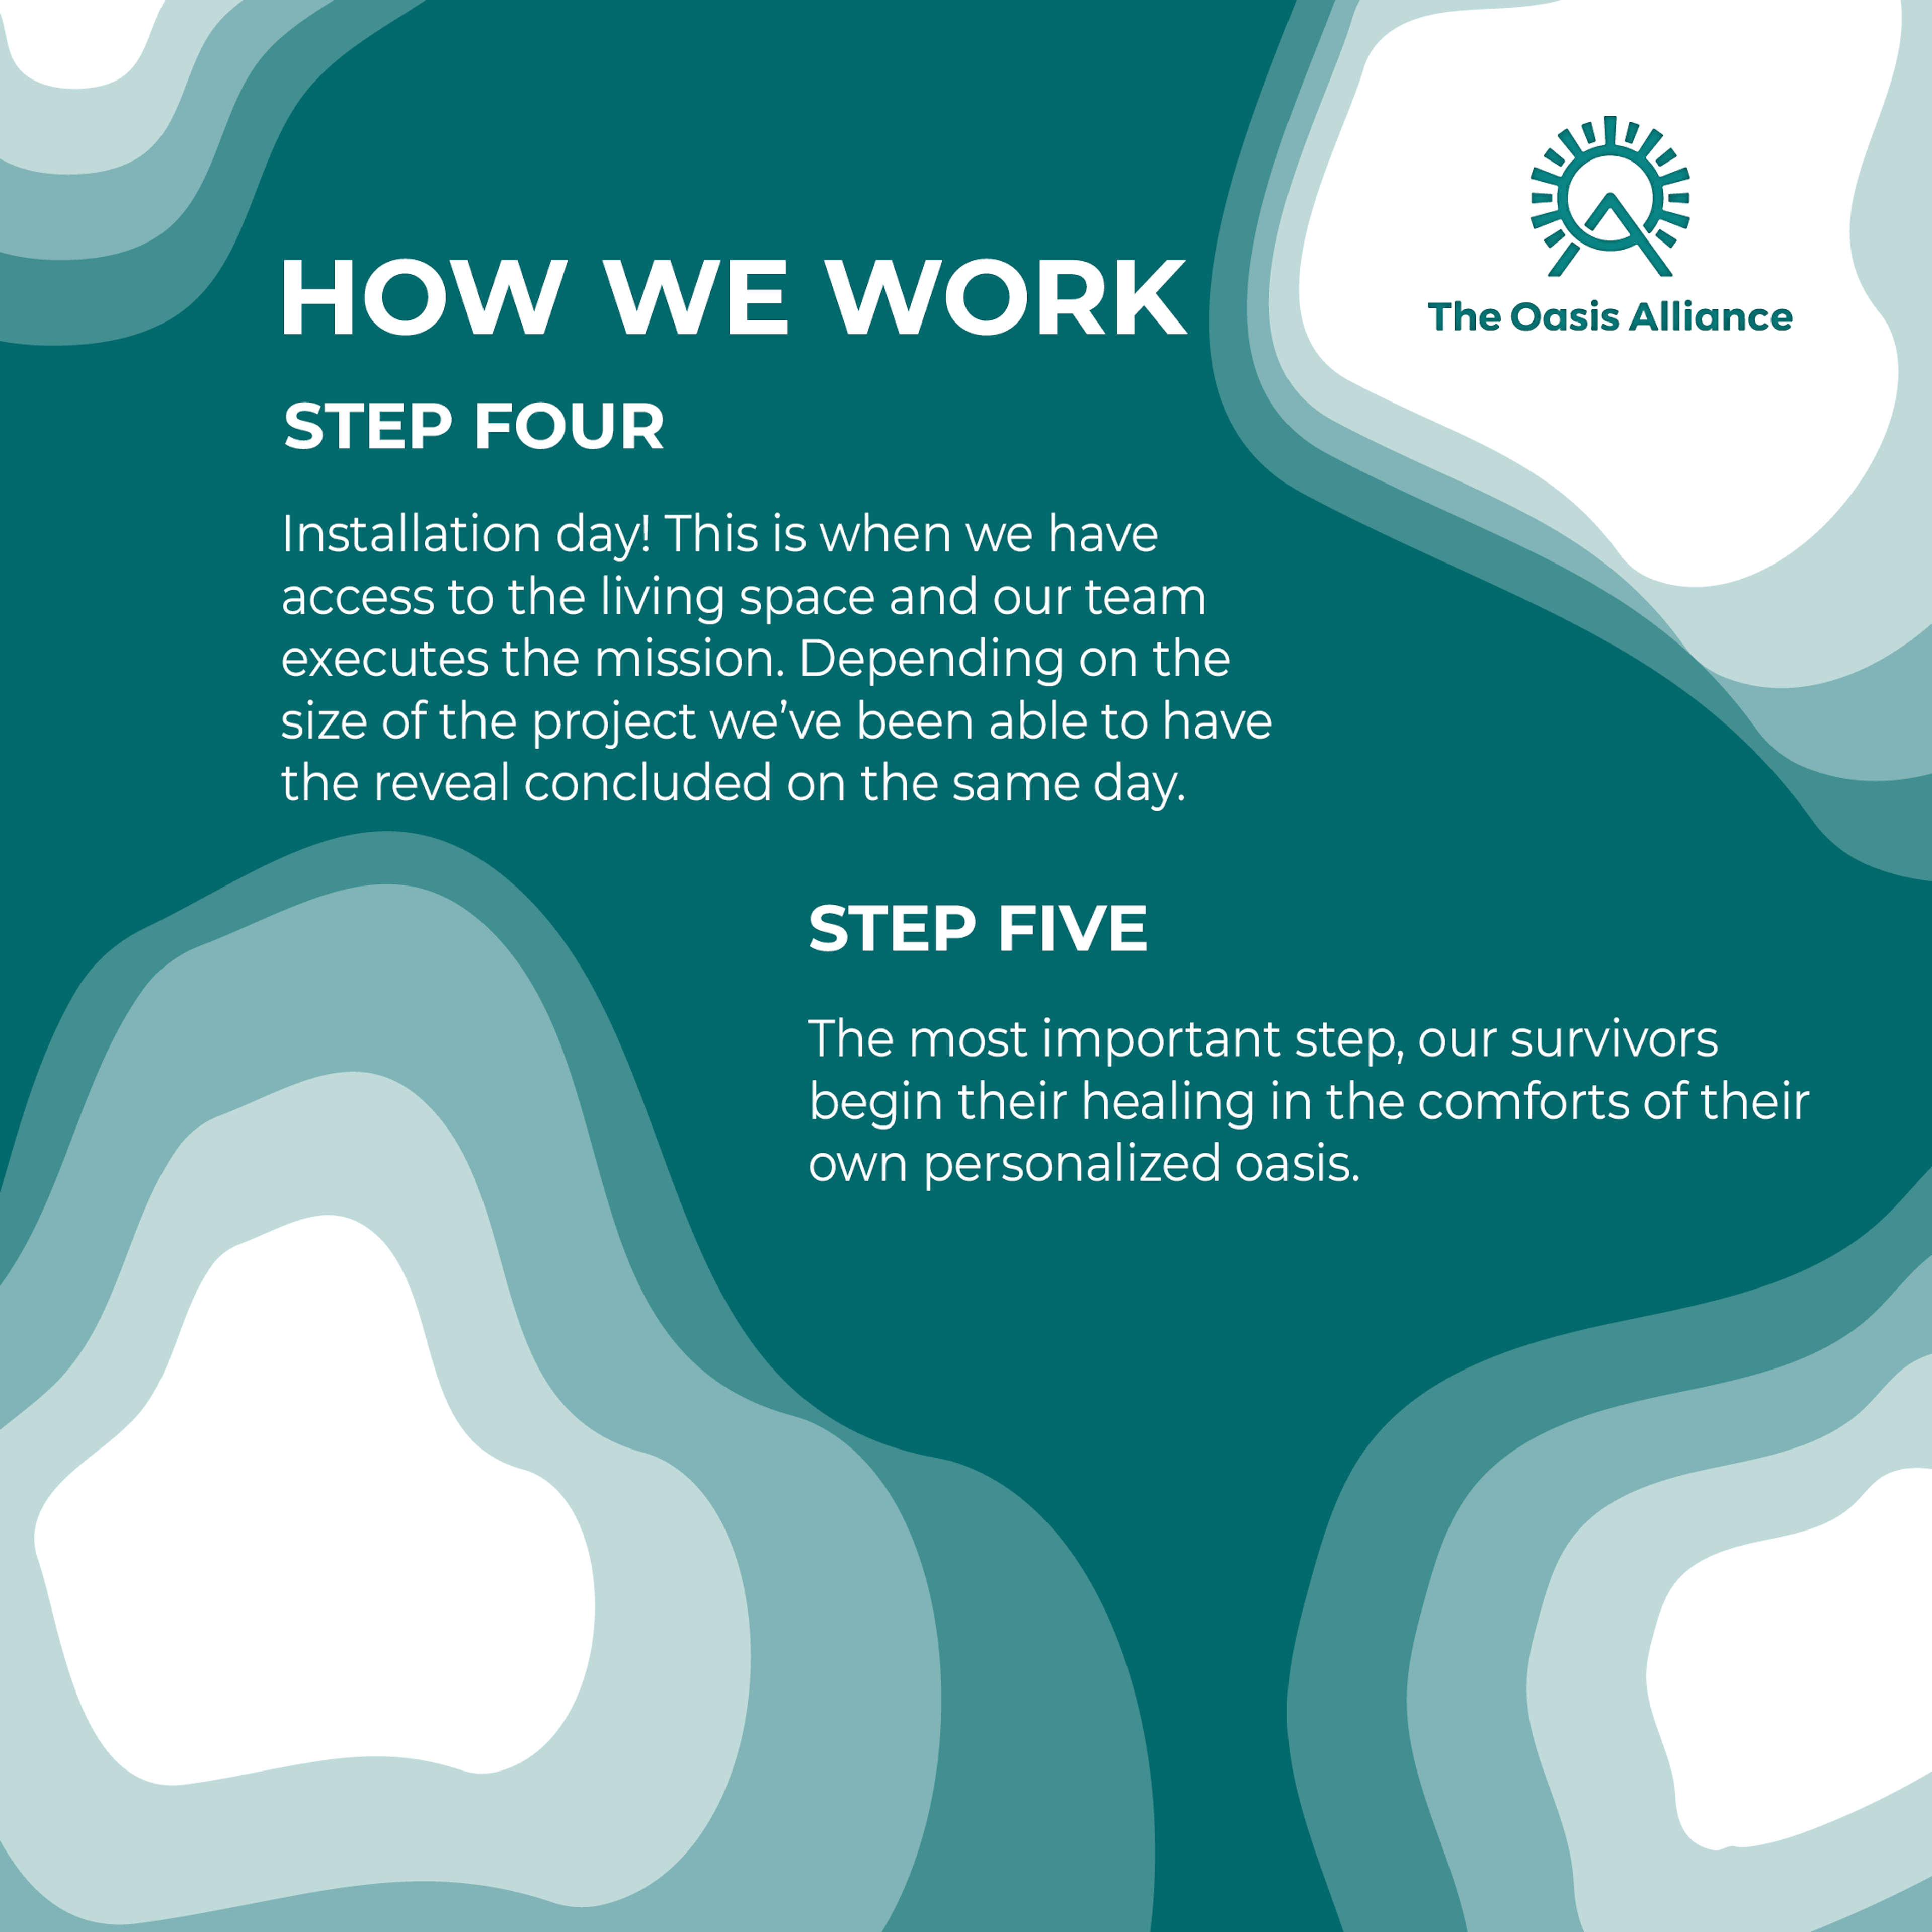 List of steps for how we work